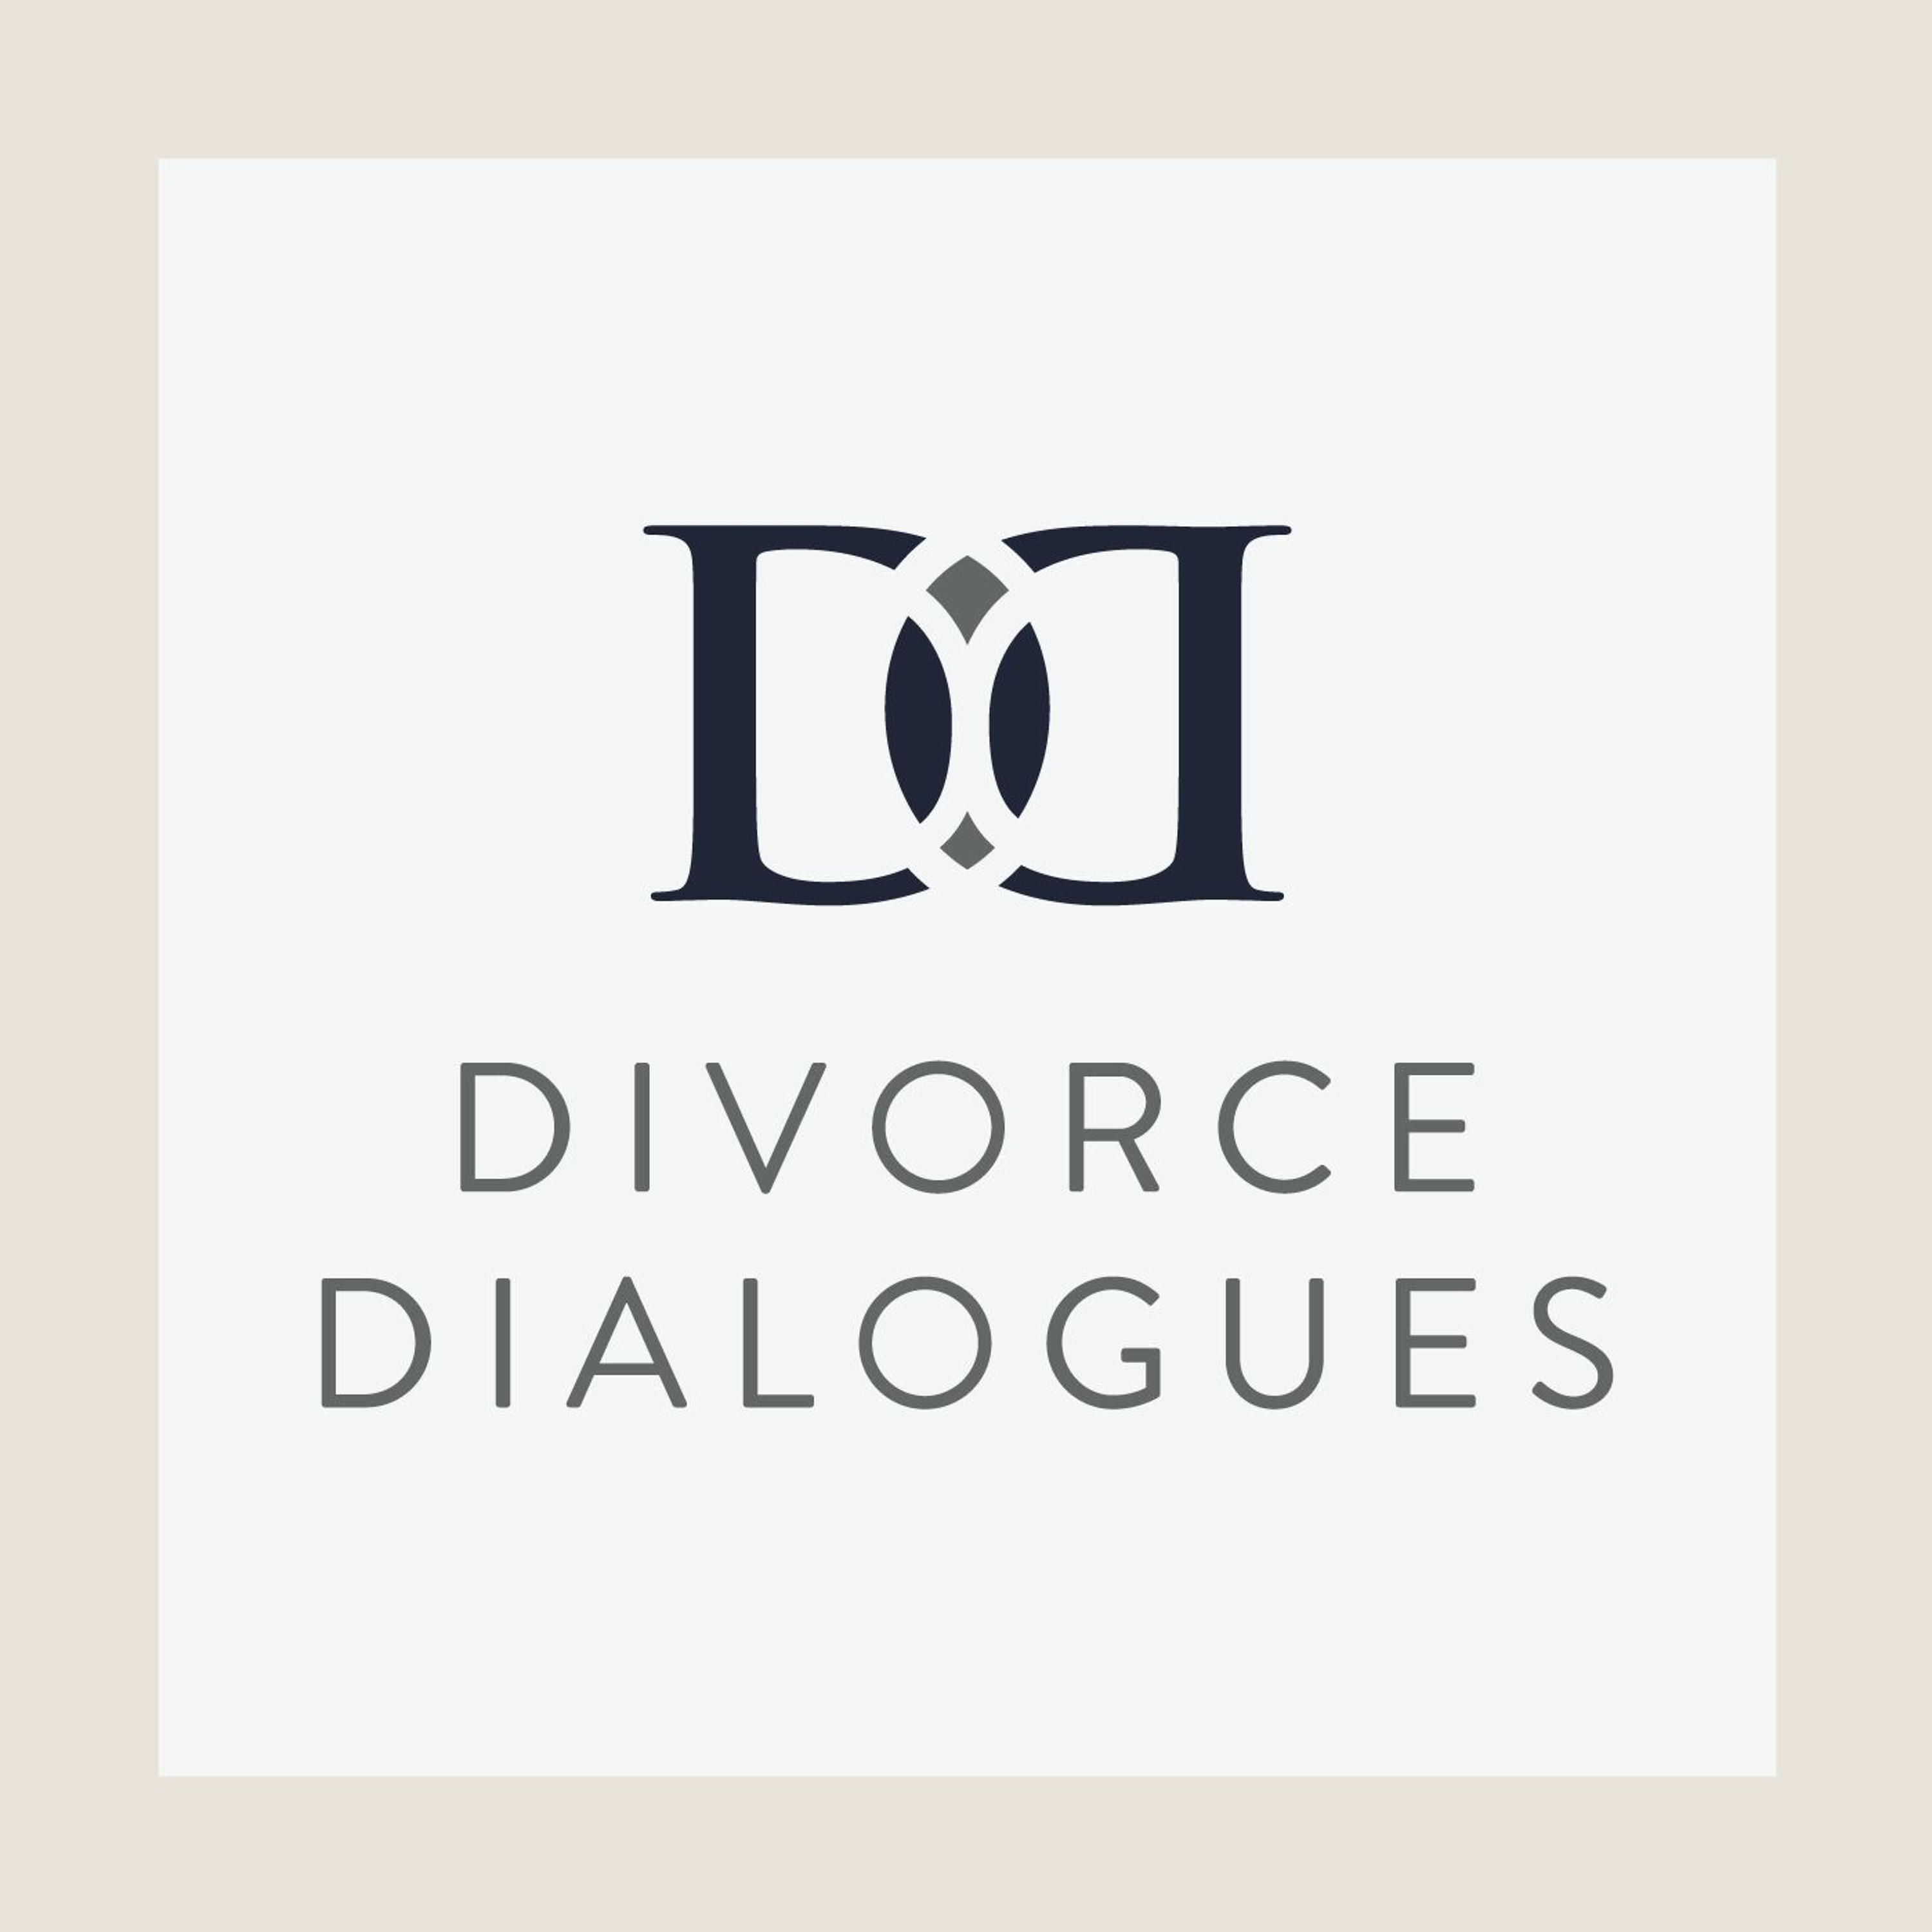 Divorce Dialogues - Is Your Marriage Beyond Saving? with Kira Gould